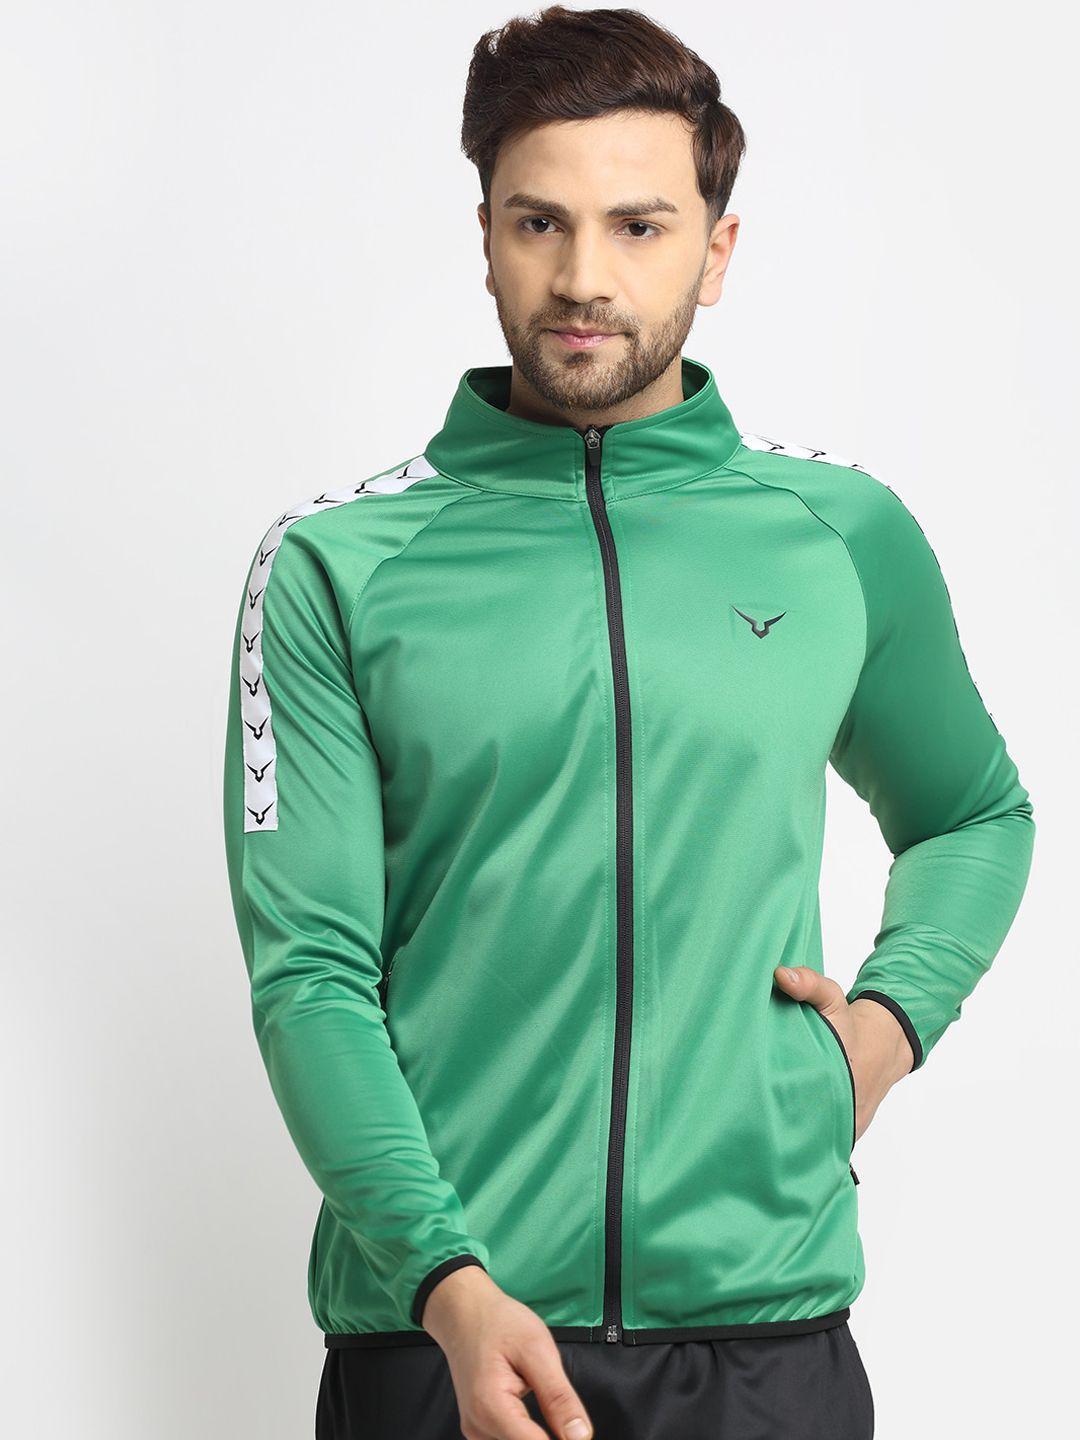 invincible men green lightweight rapid dry training or gym sporty jacket